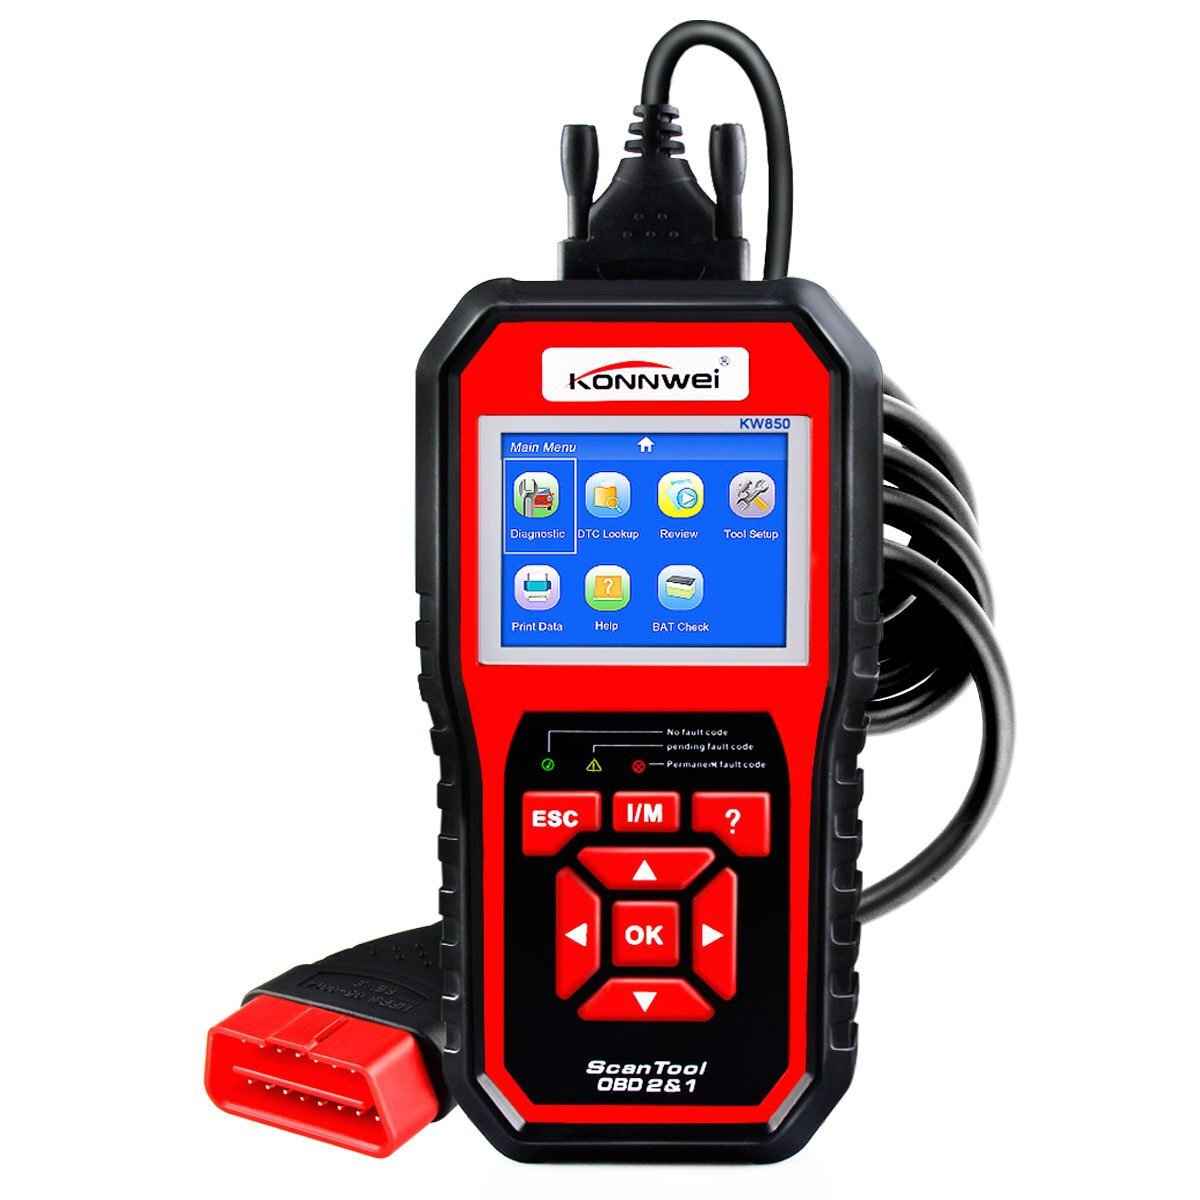 best price,konnwei,kw850,can,obd2-eobd,scanner,coupon,price,discount